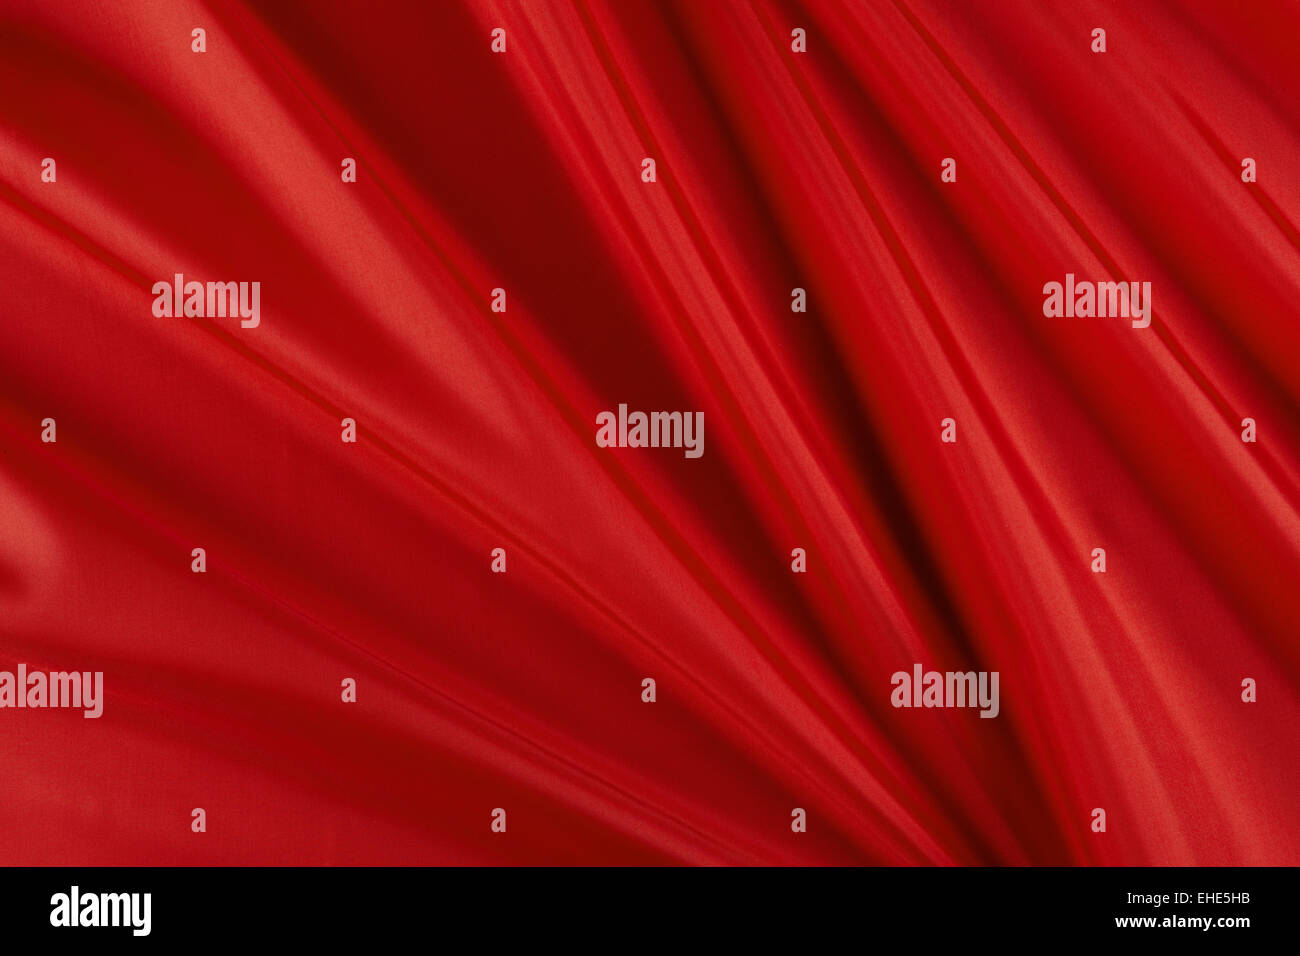 Shiny red material Stock Photo